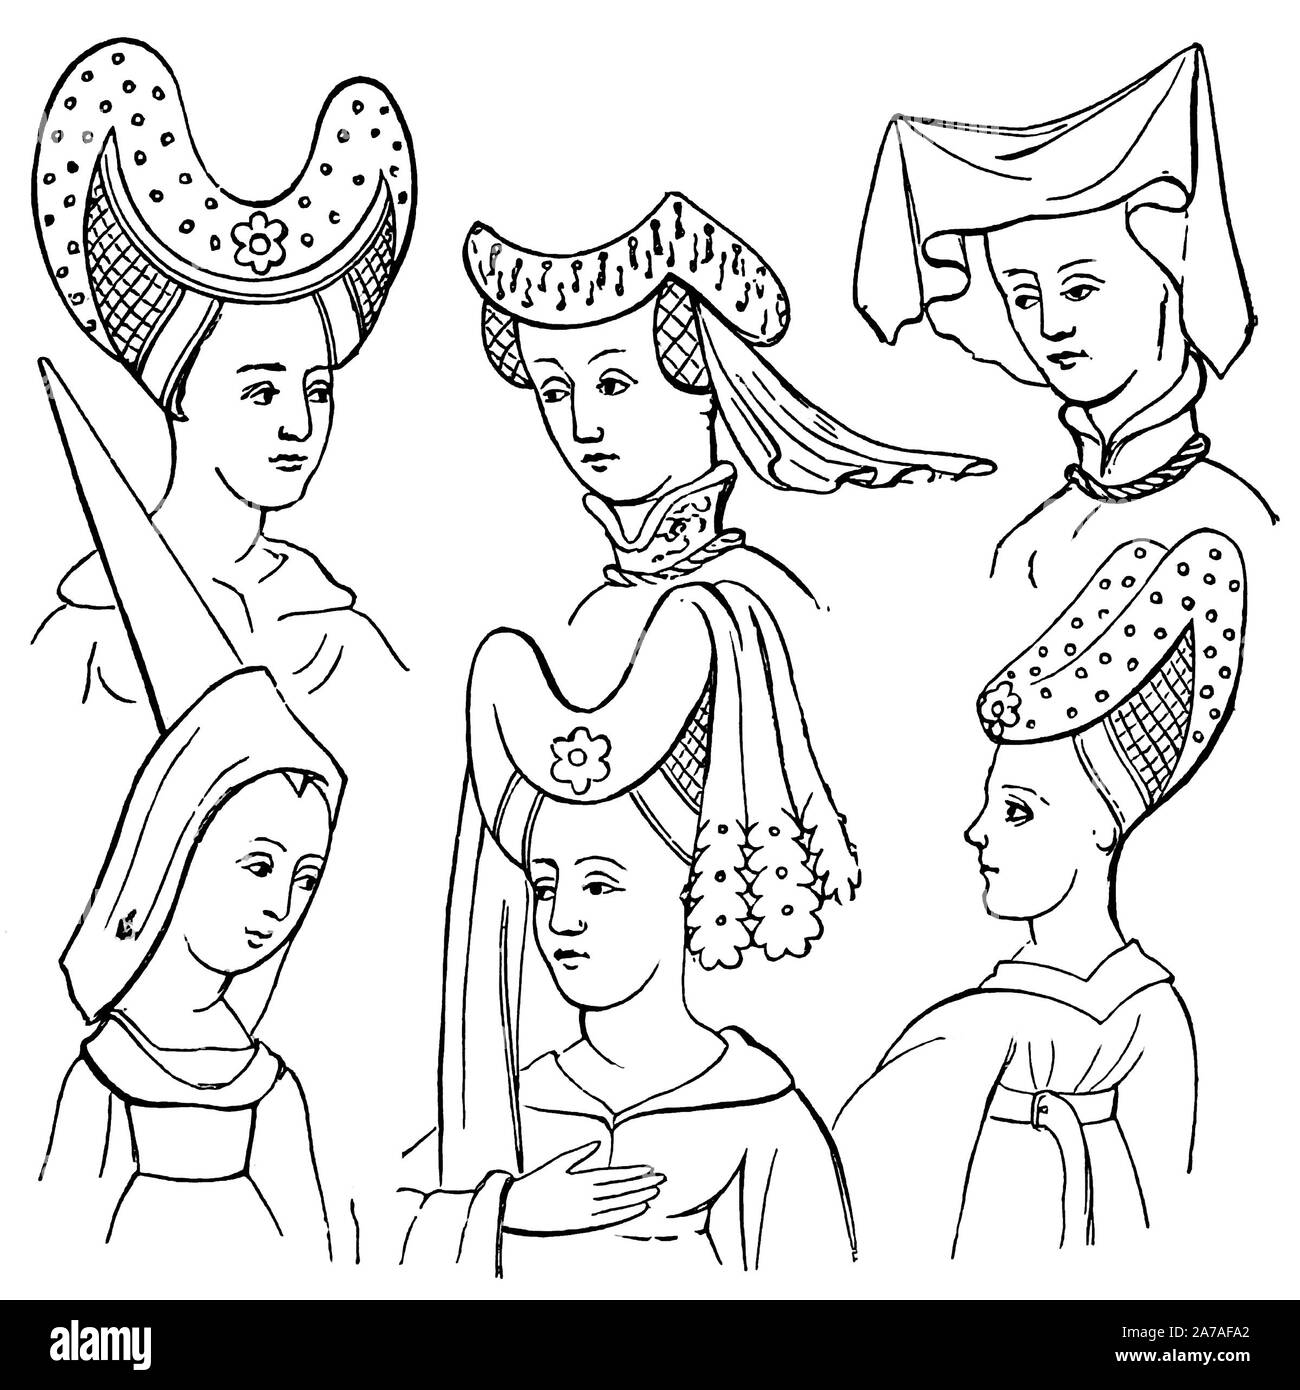 Examples of medieval headdresses. Stock Photo